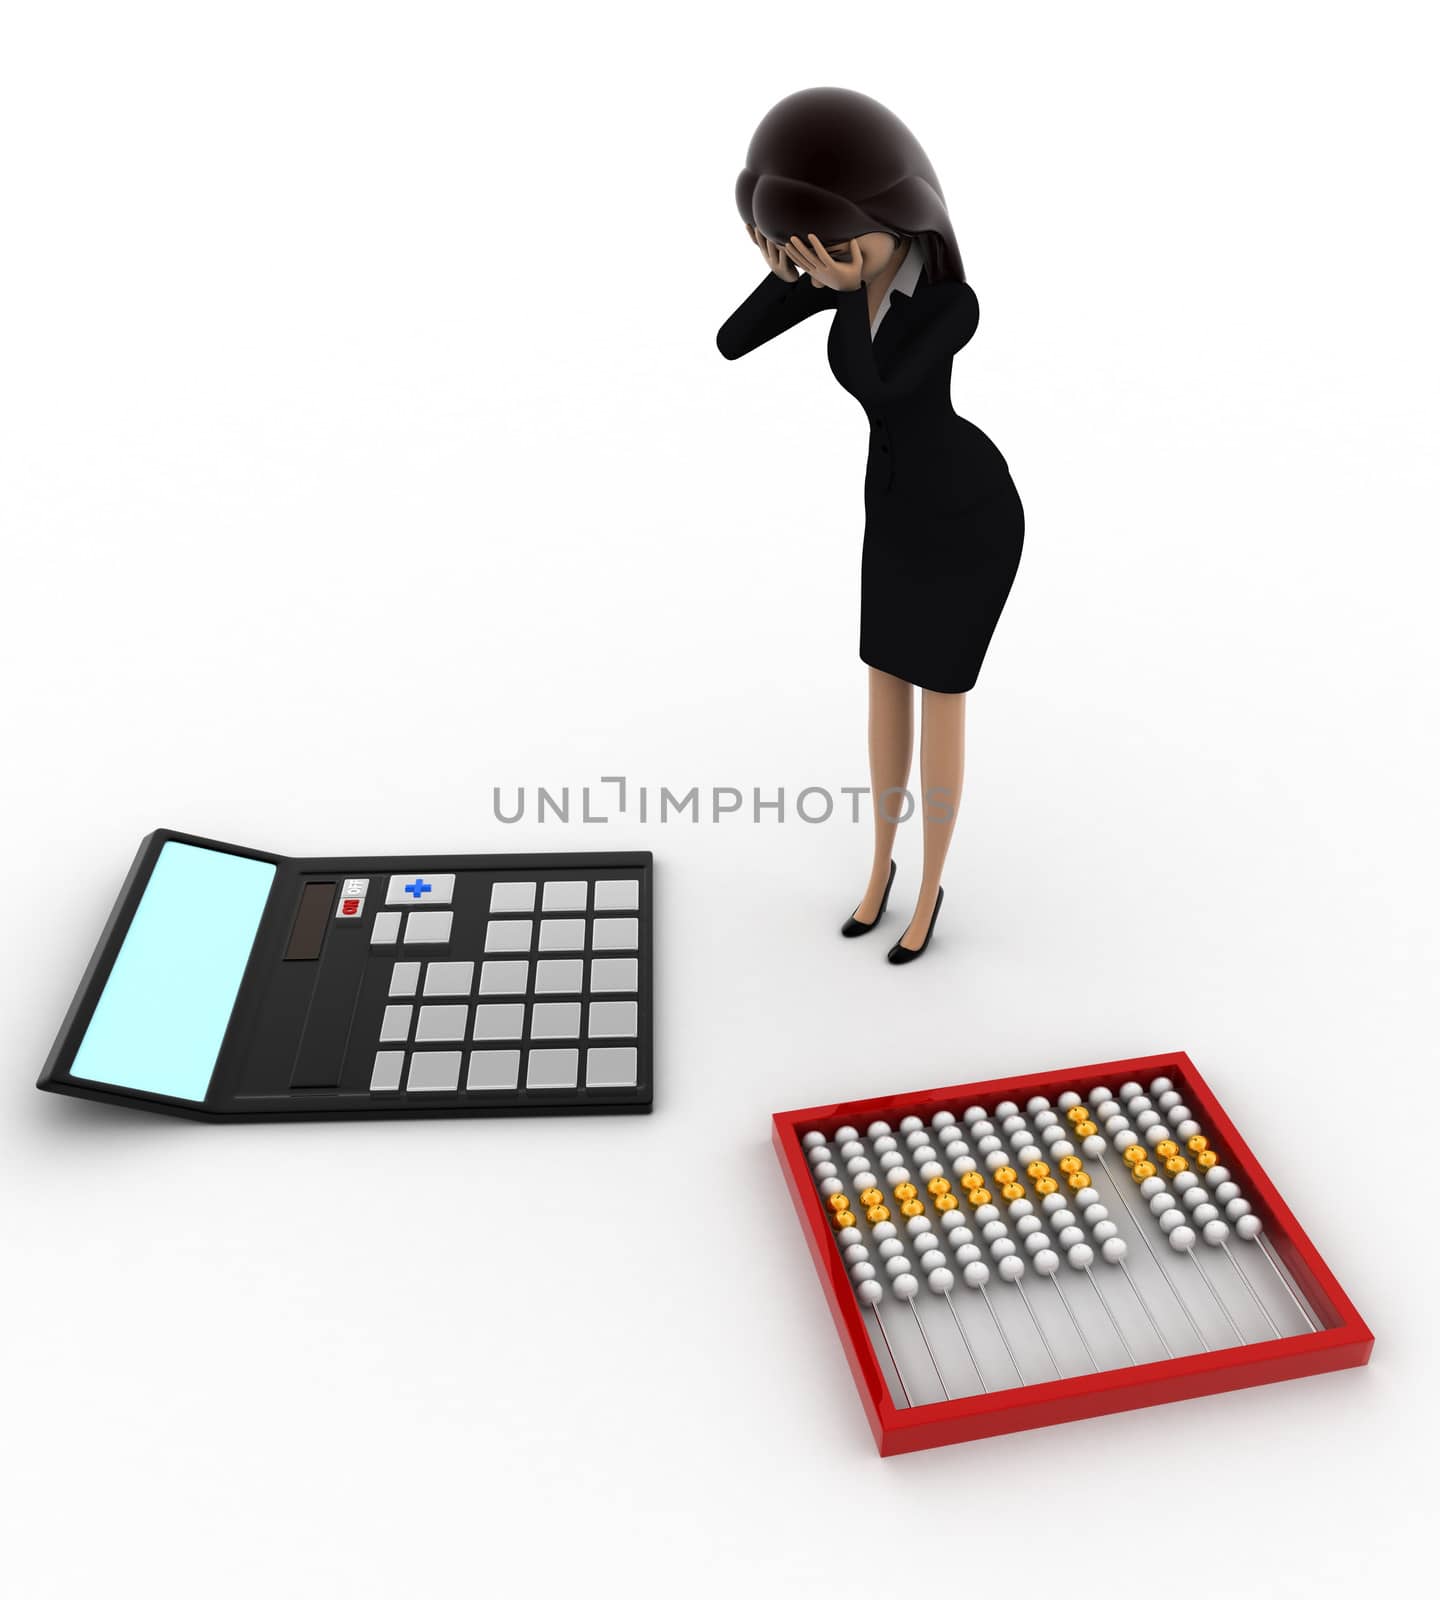 3d woman looks worried about calculation on calculator and abacus concept by touchmenithin@gmail.com